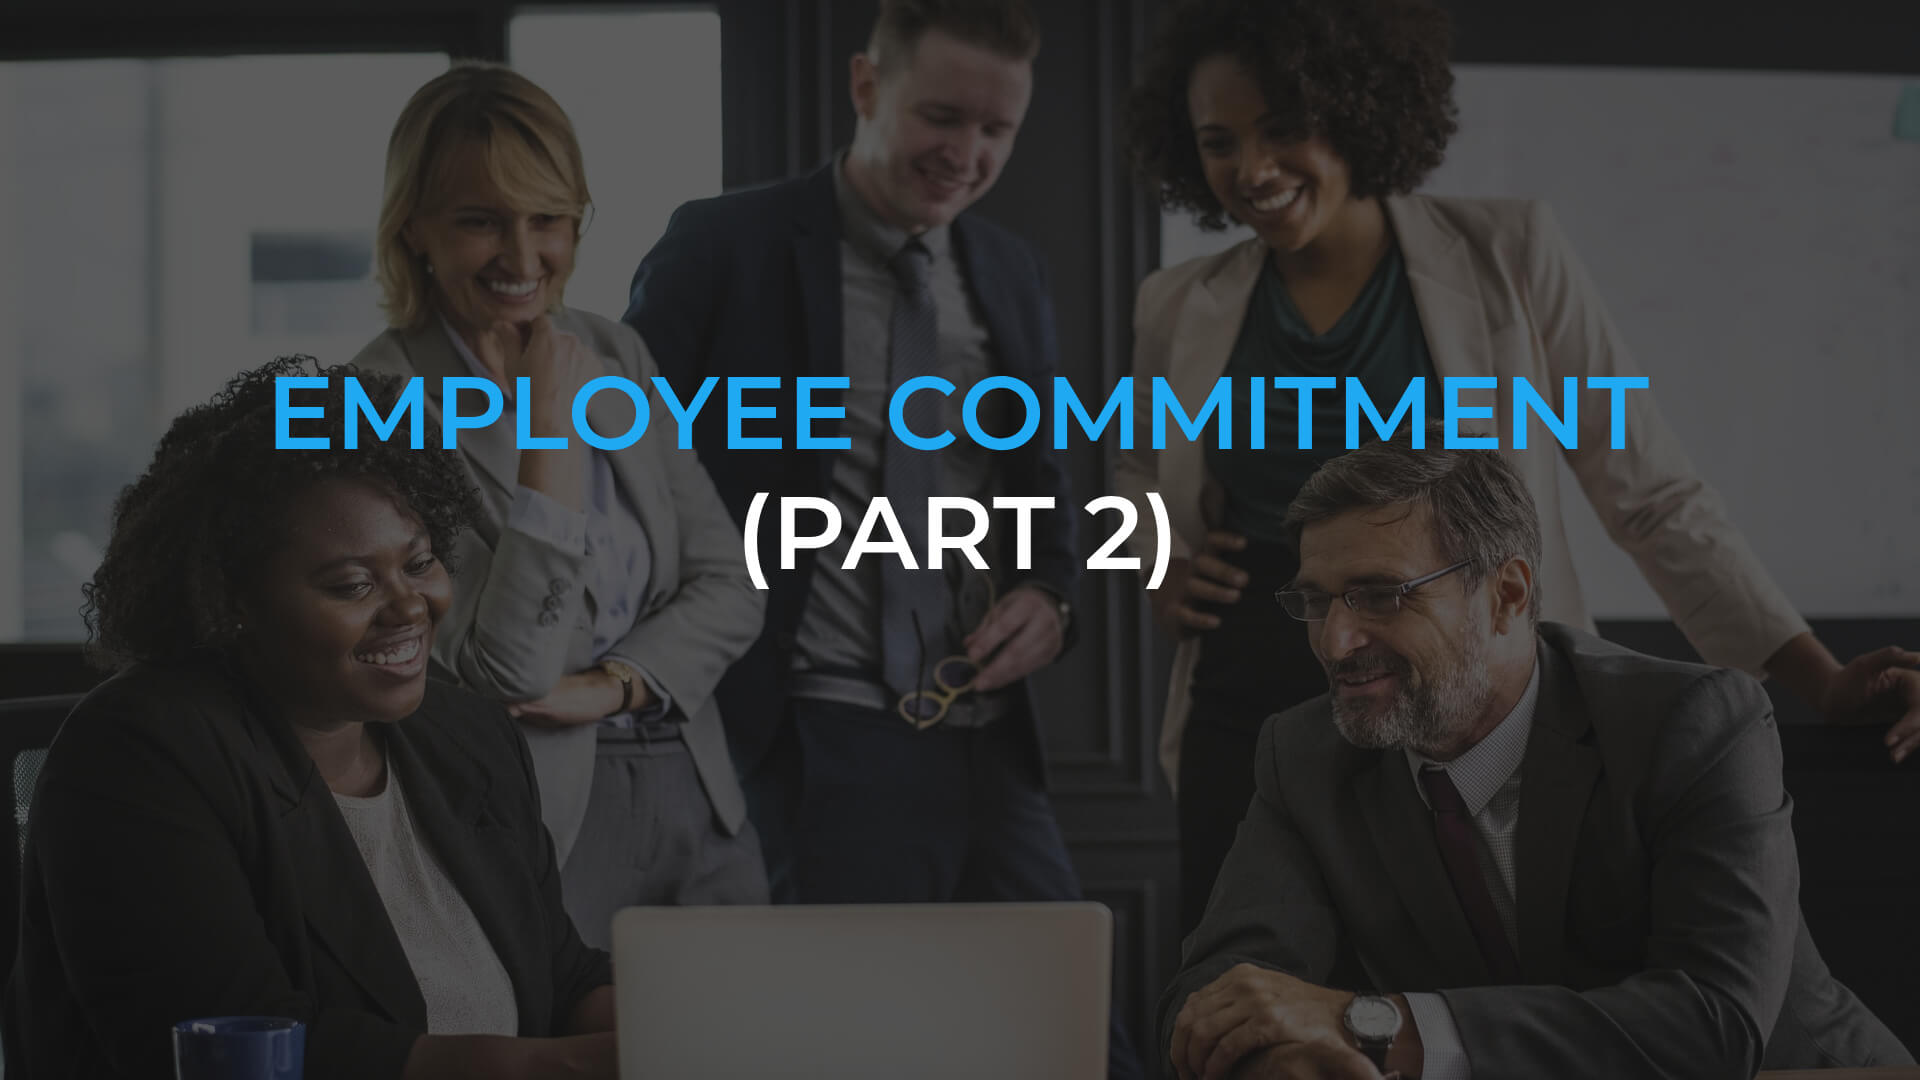 How to increase employee commitment using digital signage (Part 2)